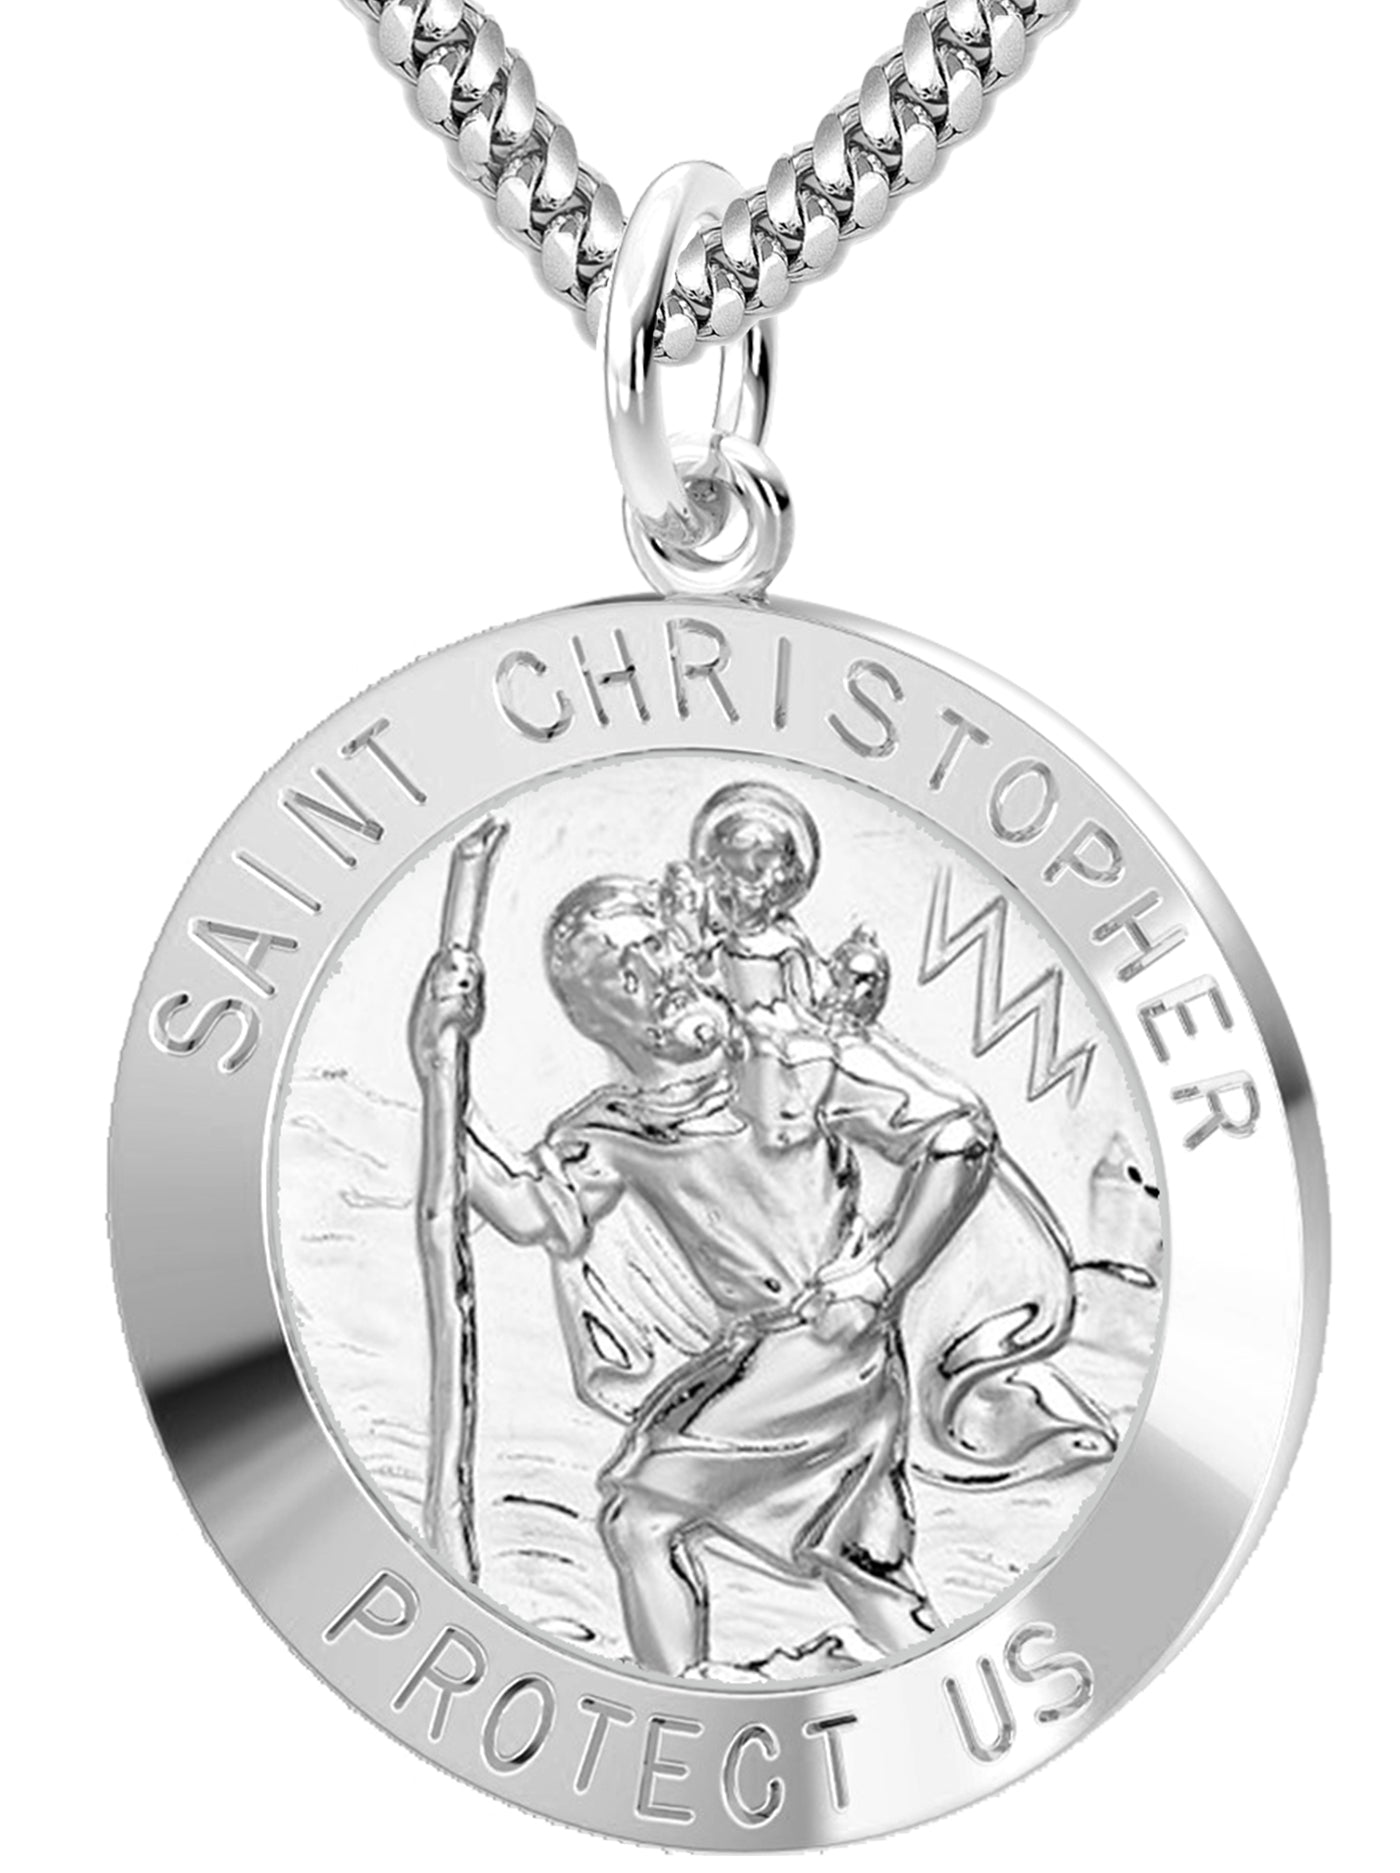 Men's Solid 925 Sterling Silver Saint Christopher Round Polished Pendant  Necklace, 25mm - 22in 3.5mm Miami Chain